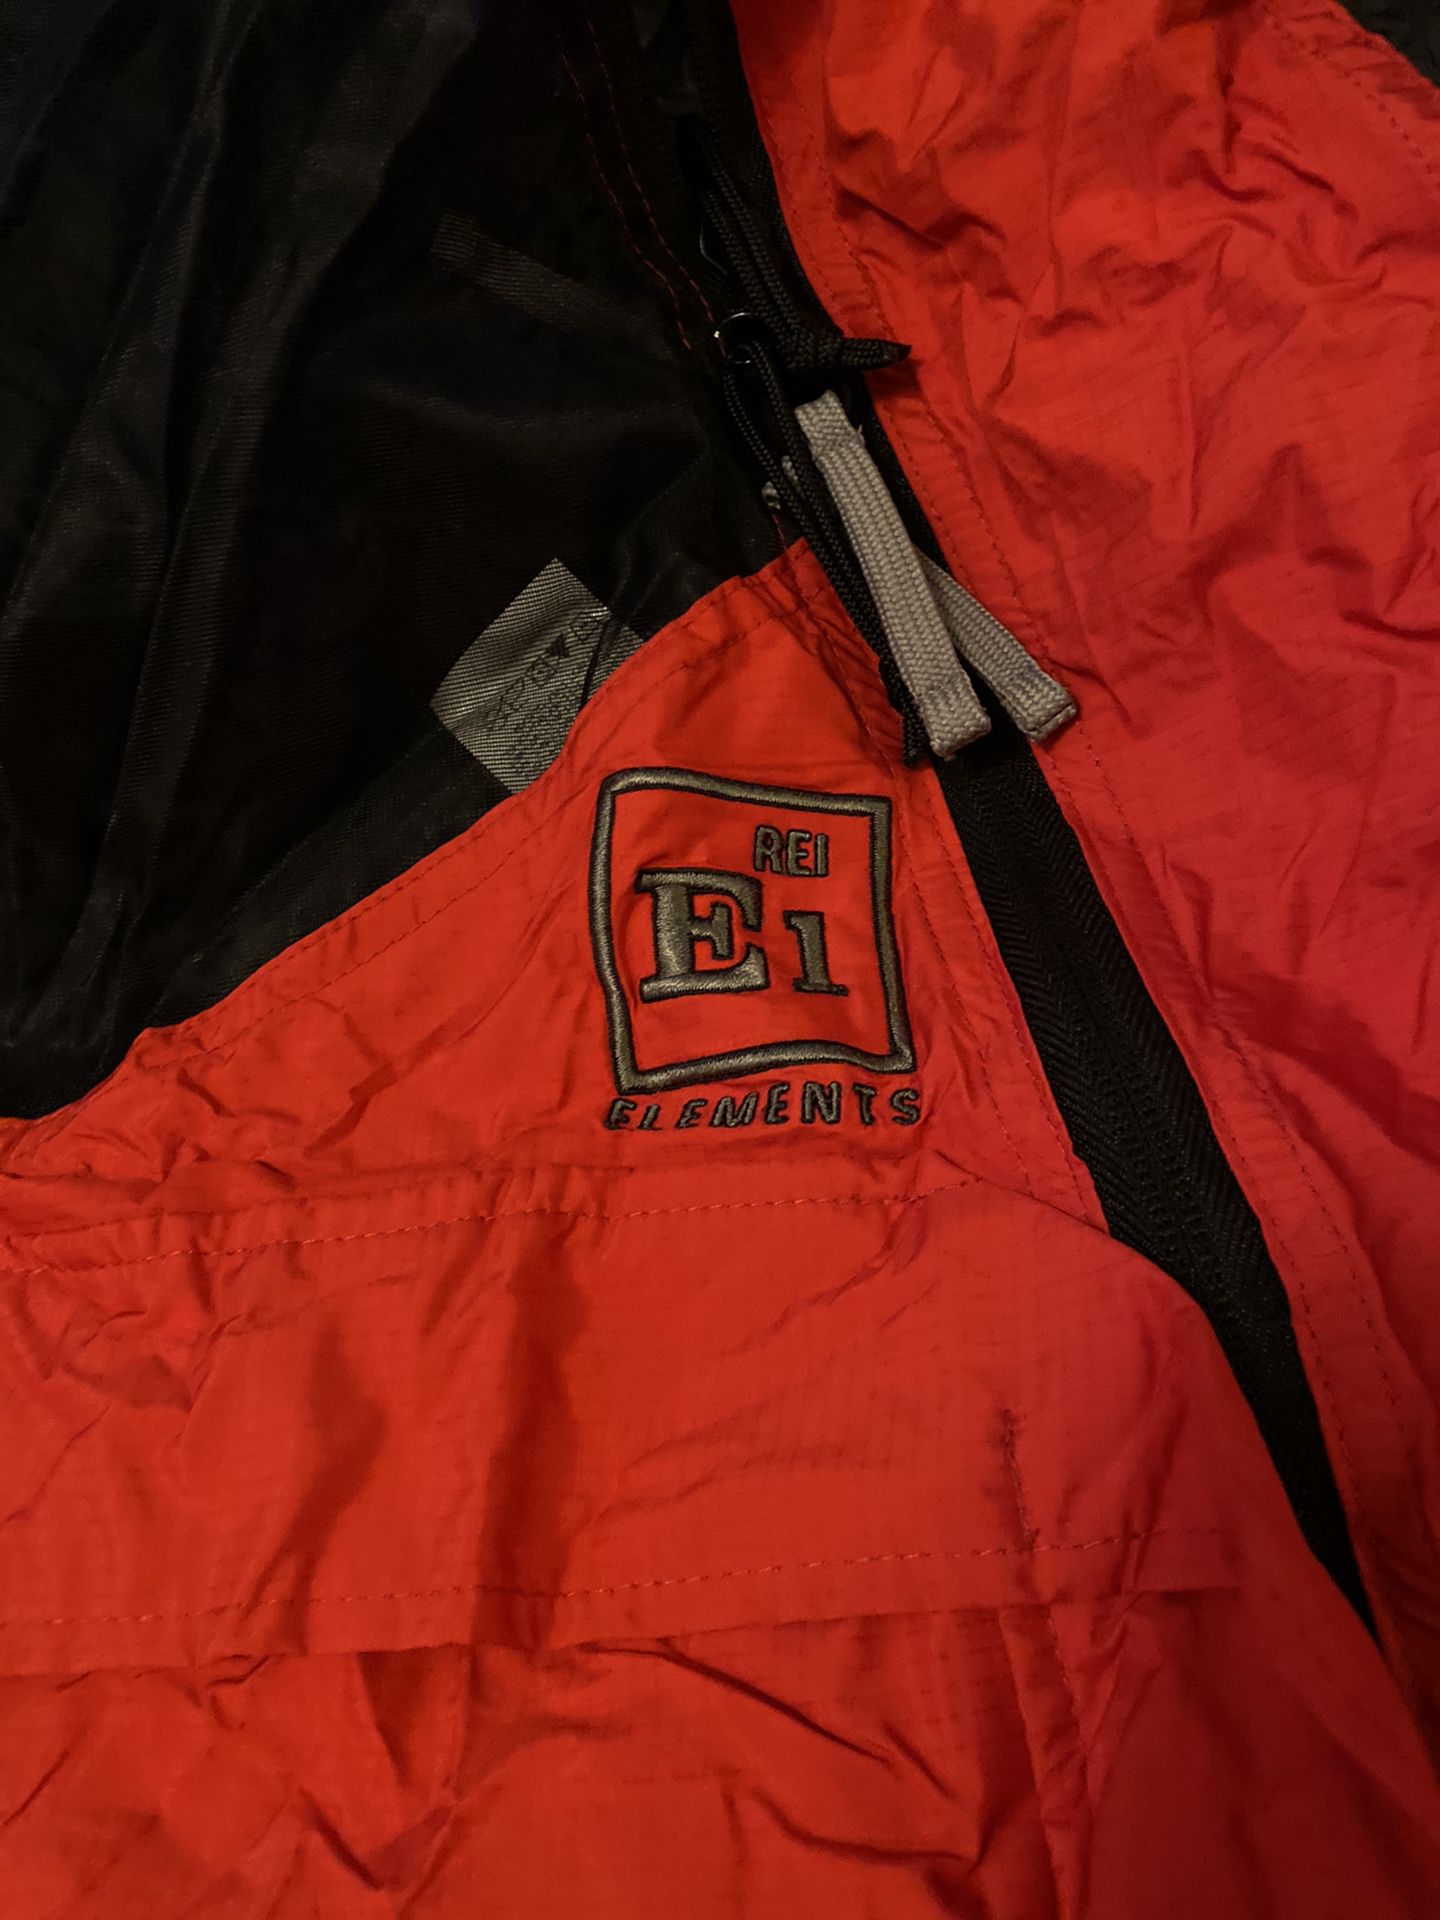 New REI Water Resistant Shell For Sleeping Bags 